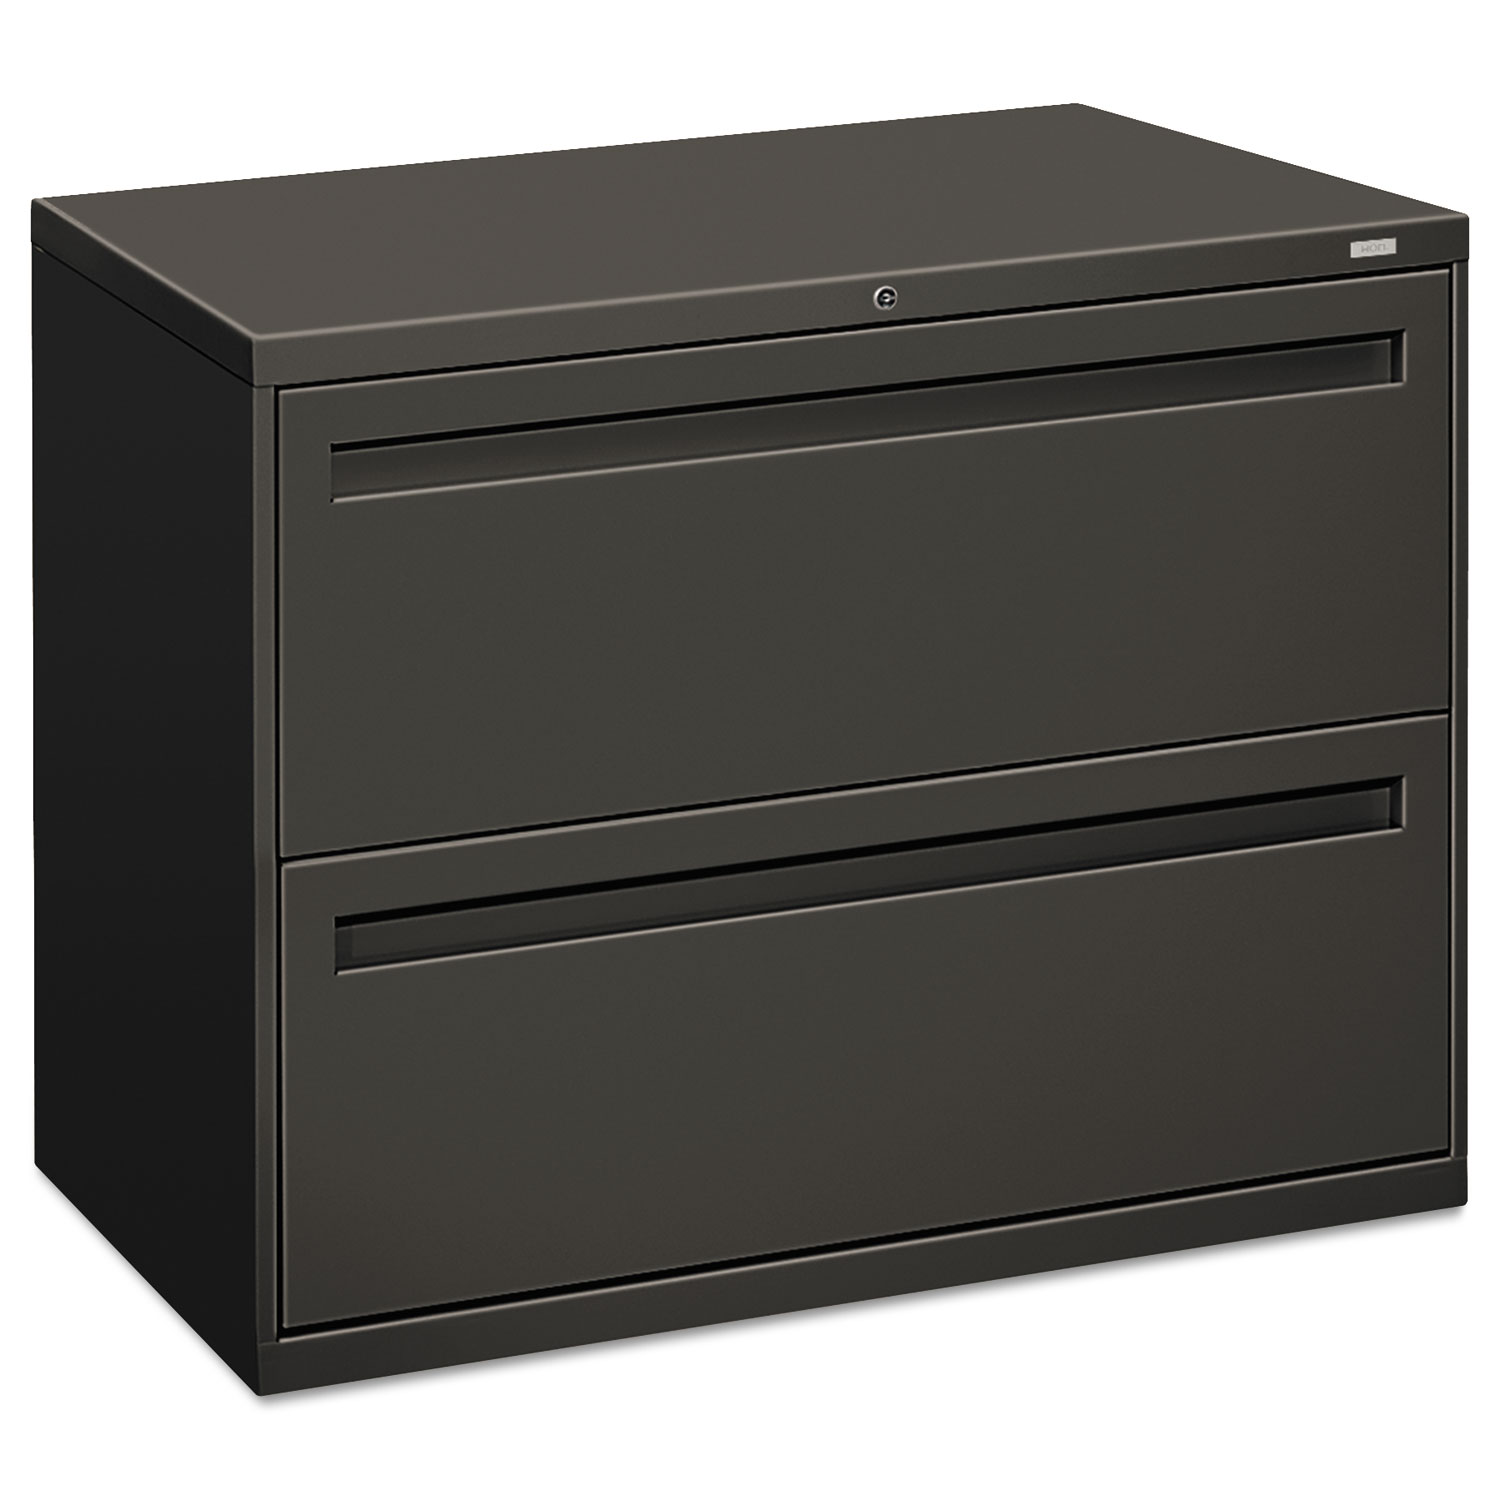  HON H782.L.S 700 Series Two-Drawer Lateral File, 36w x 18d x 28h, Charcoal (HON782LS) 